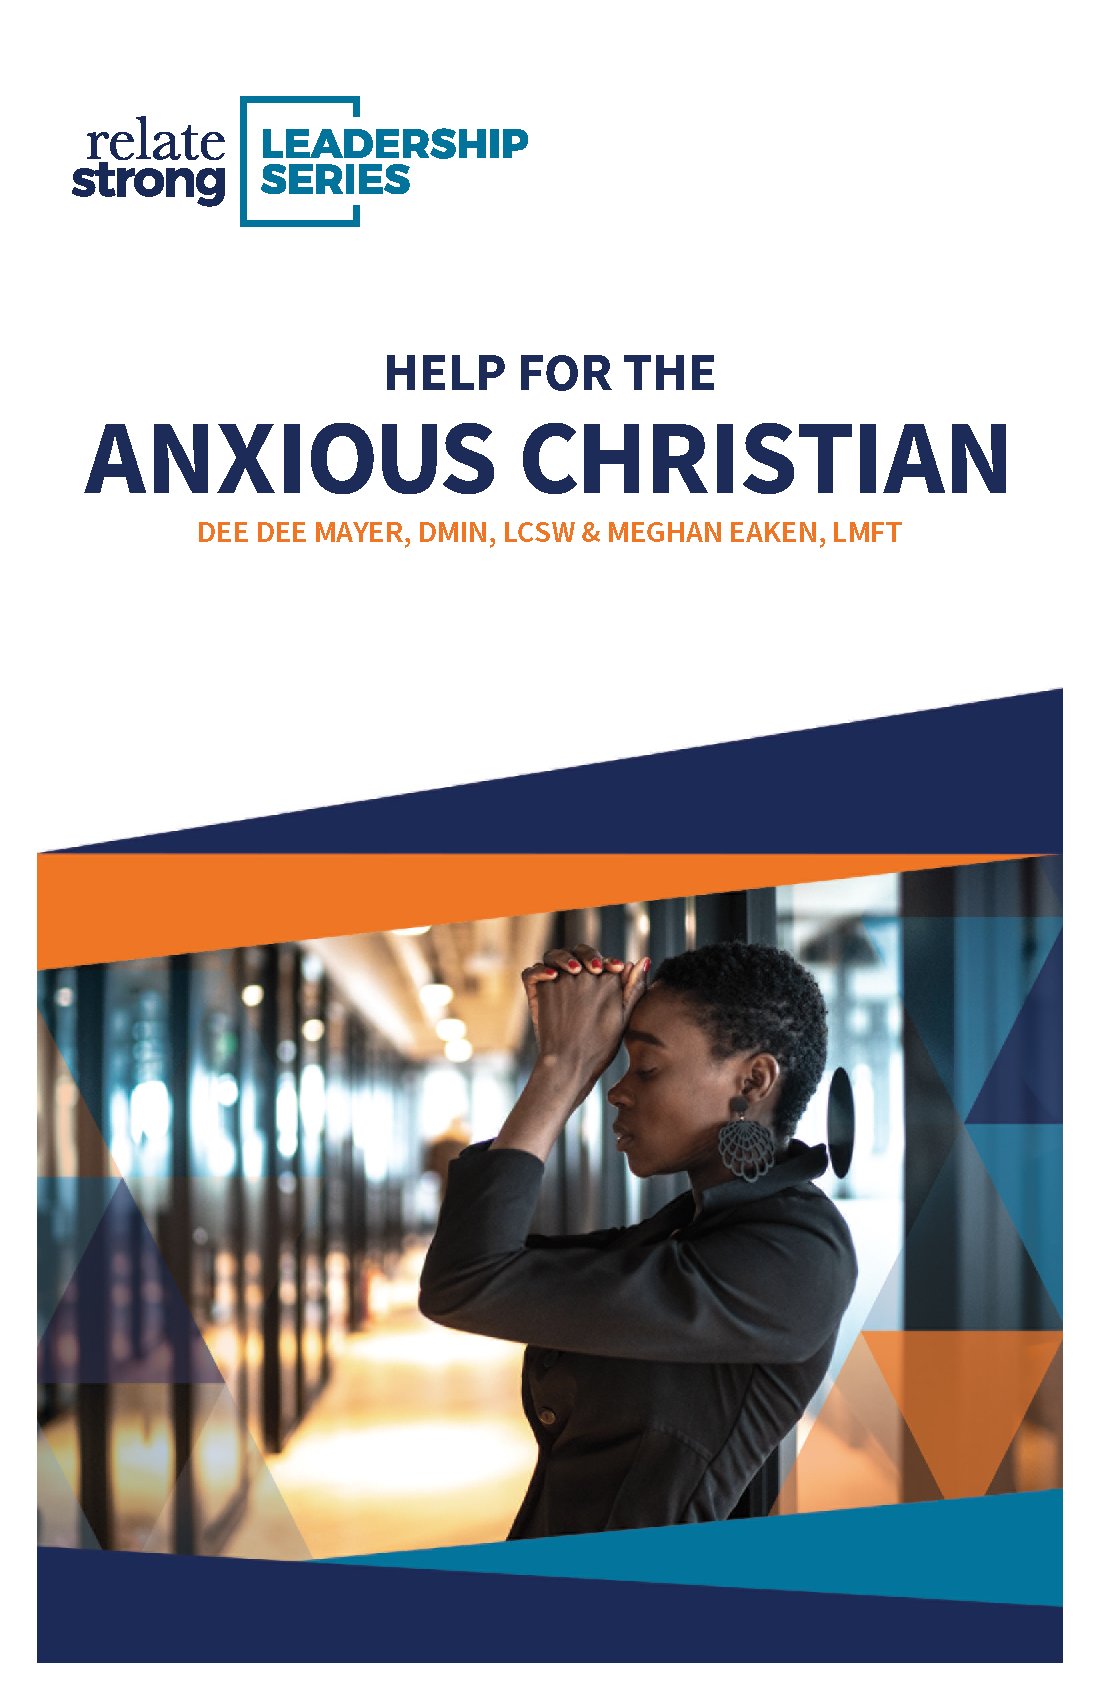 WORKBOOK - Help for the Anxious Christian